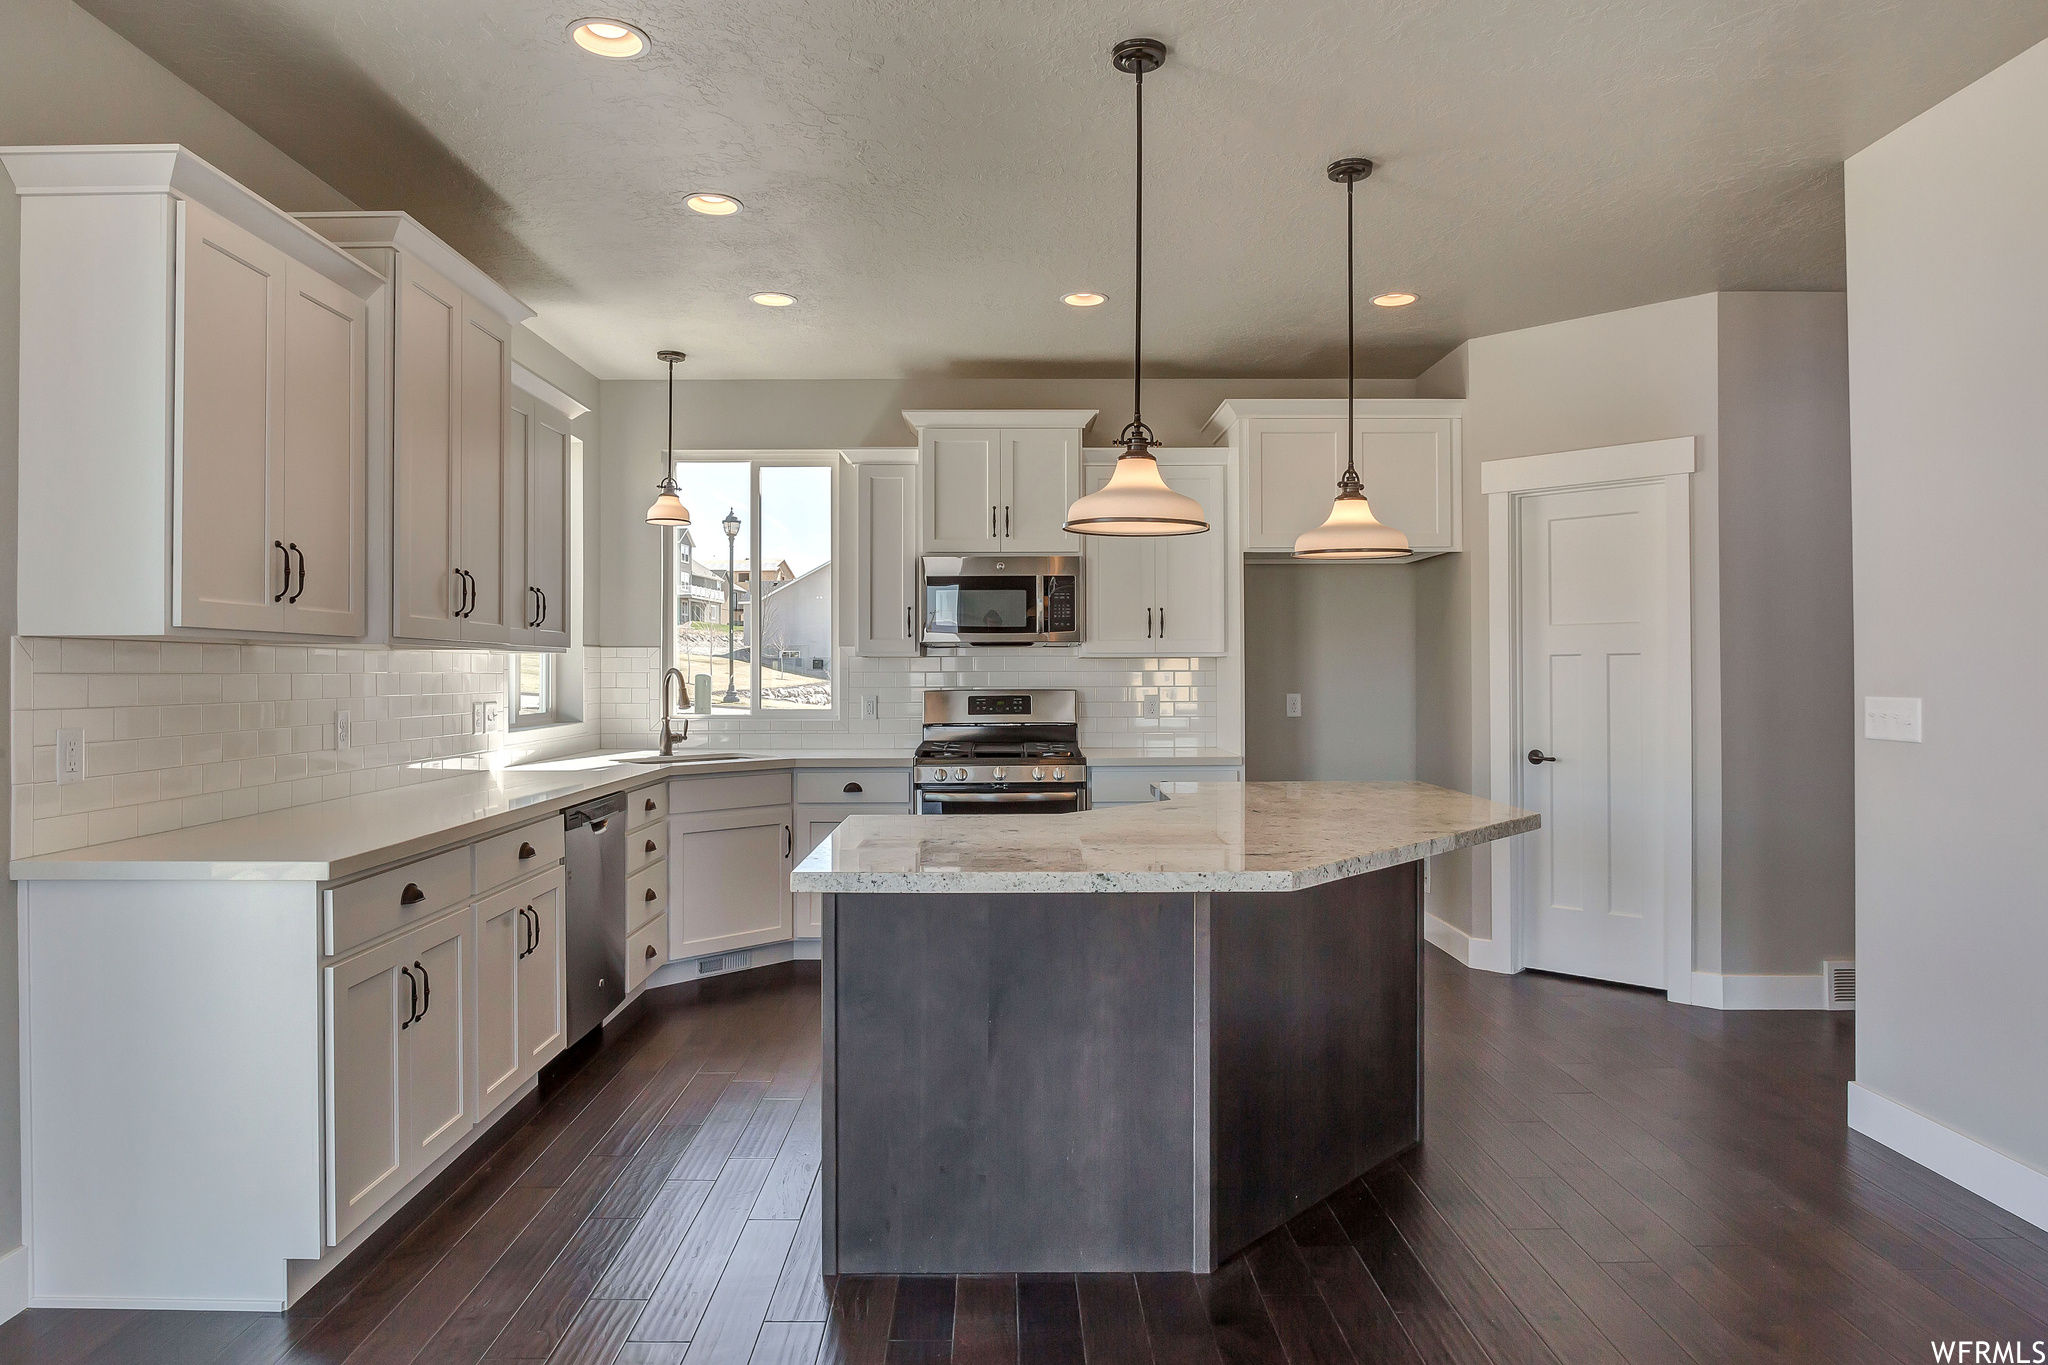 Kitchen with white cabinets, appliances with stainless steel finishes, tasteful backsplash, and pendant lighting